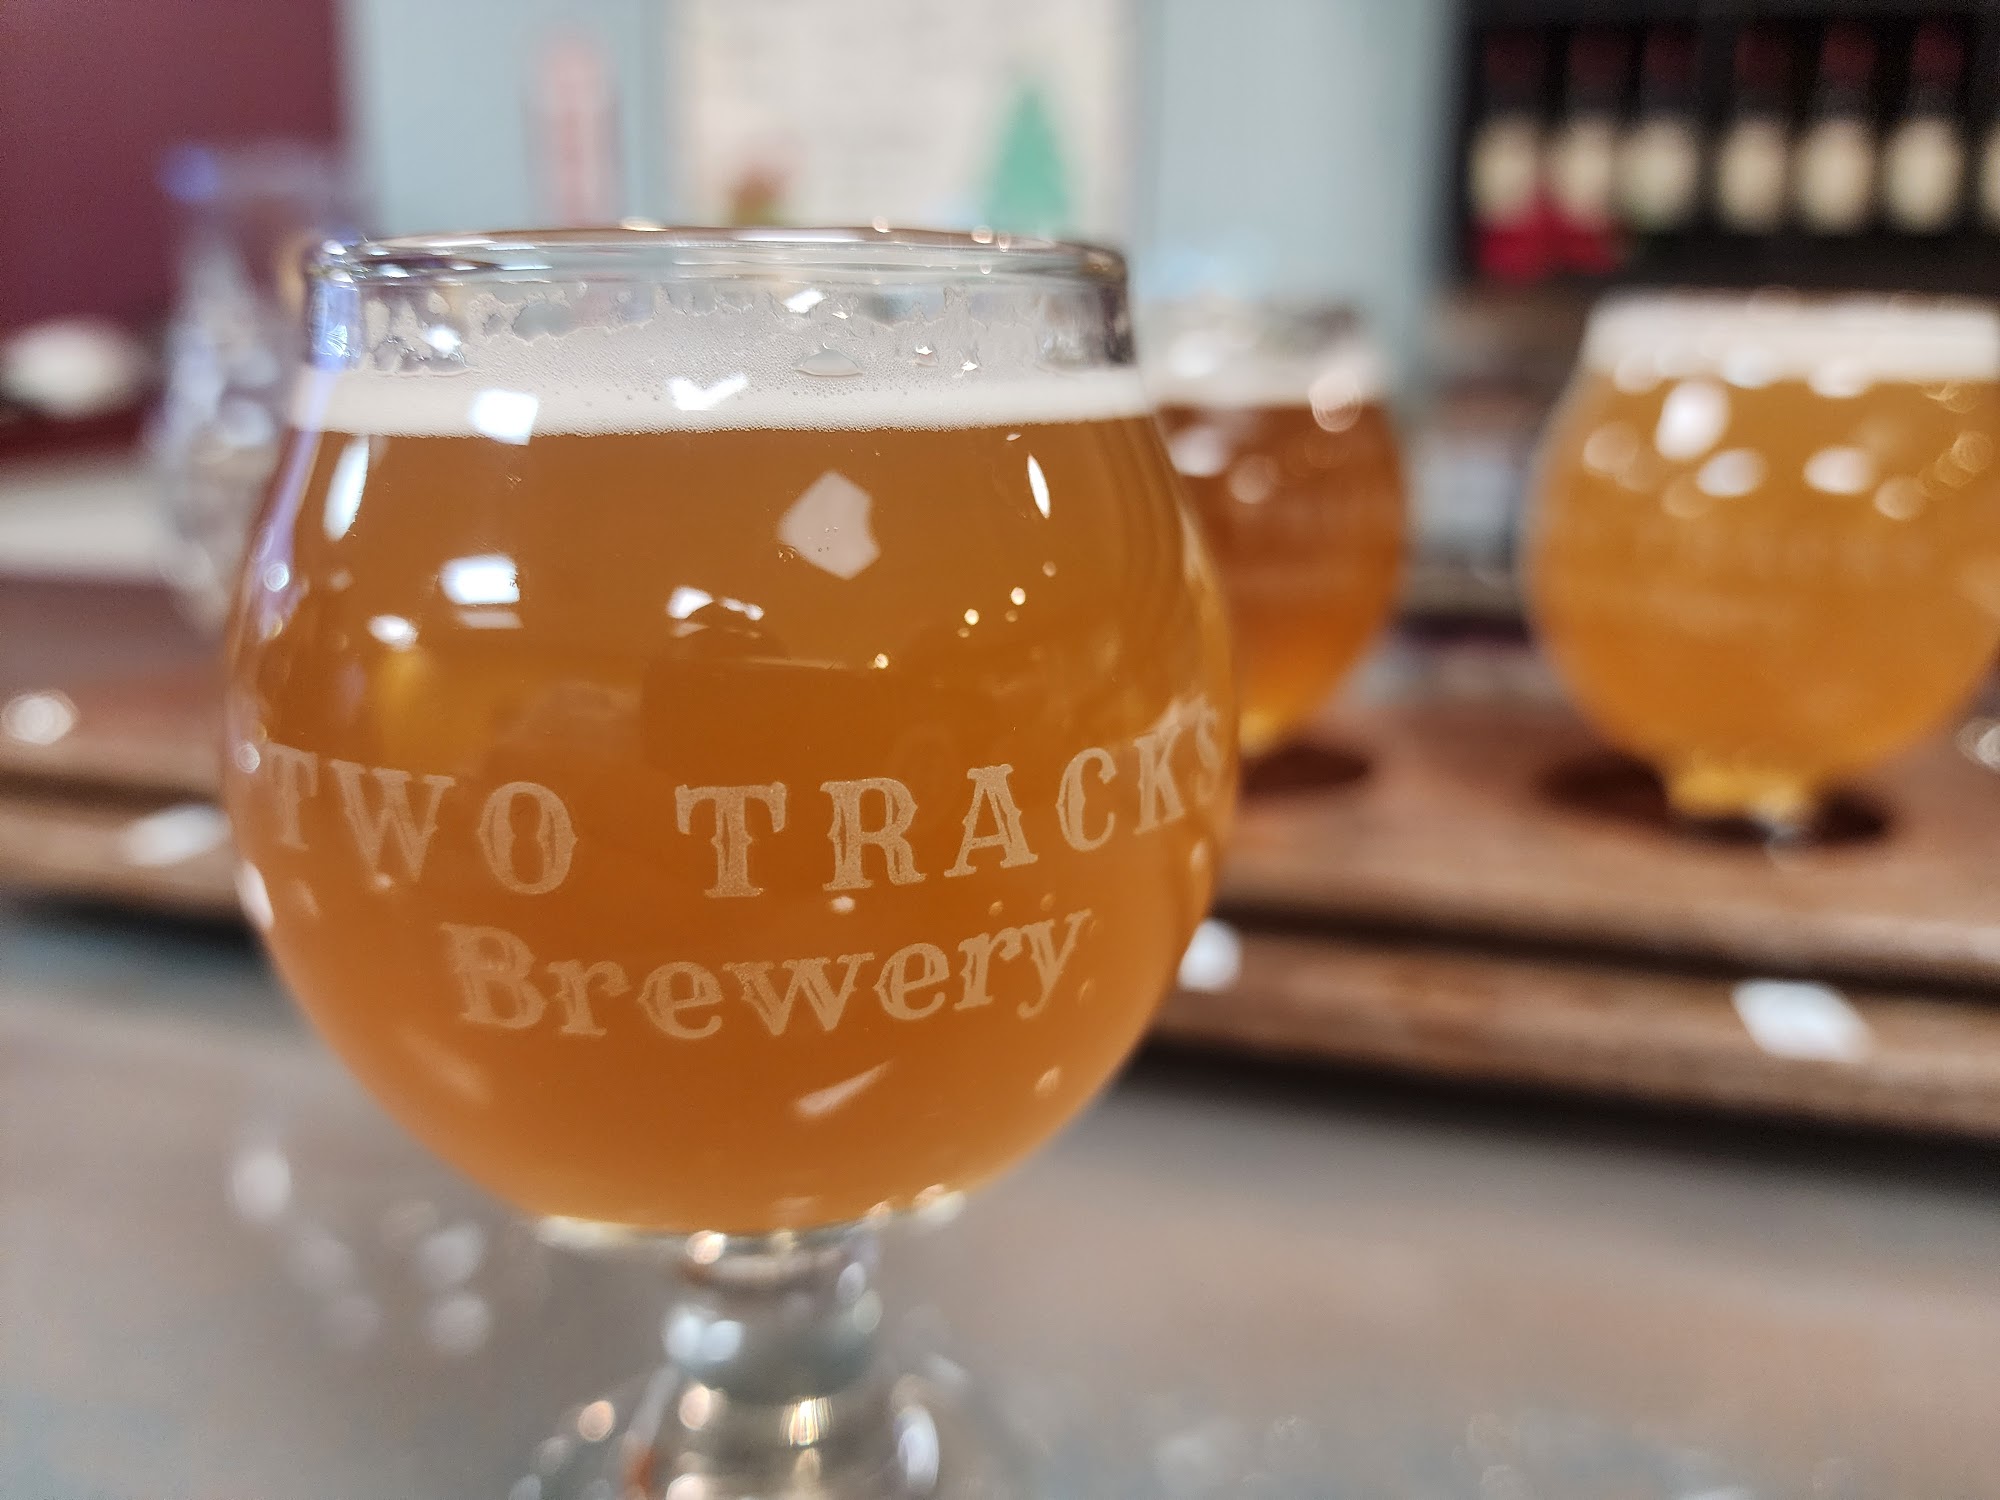 Two Tracks Cellars Brewery